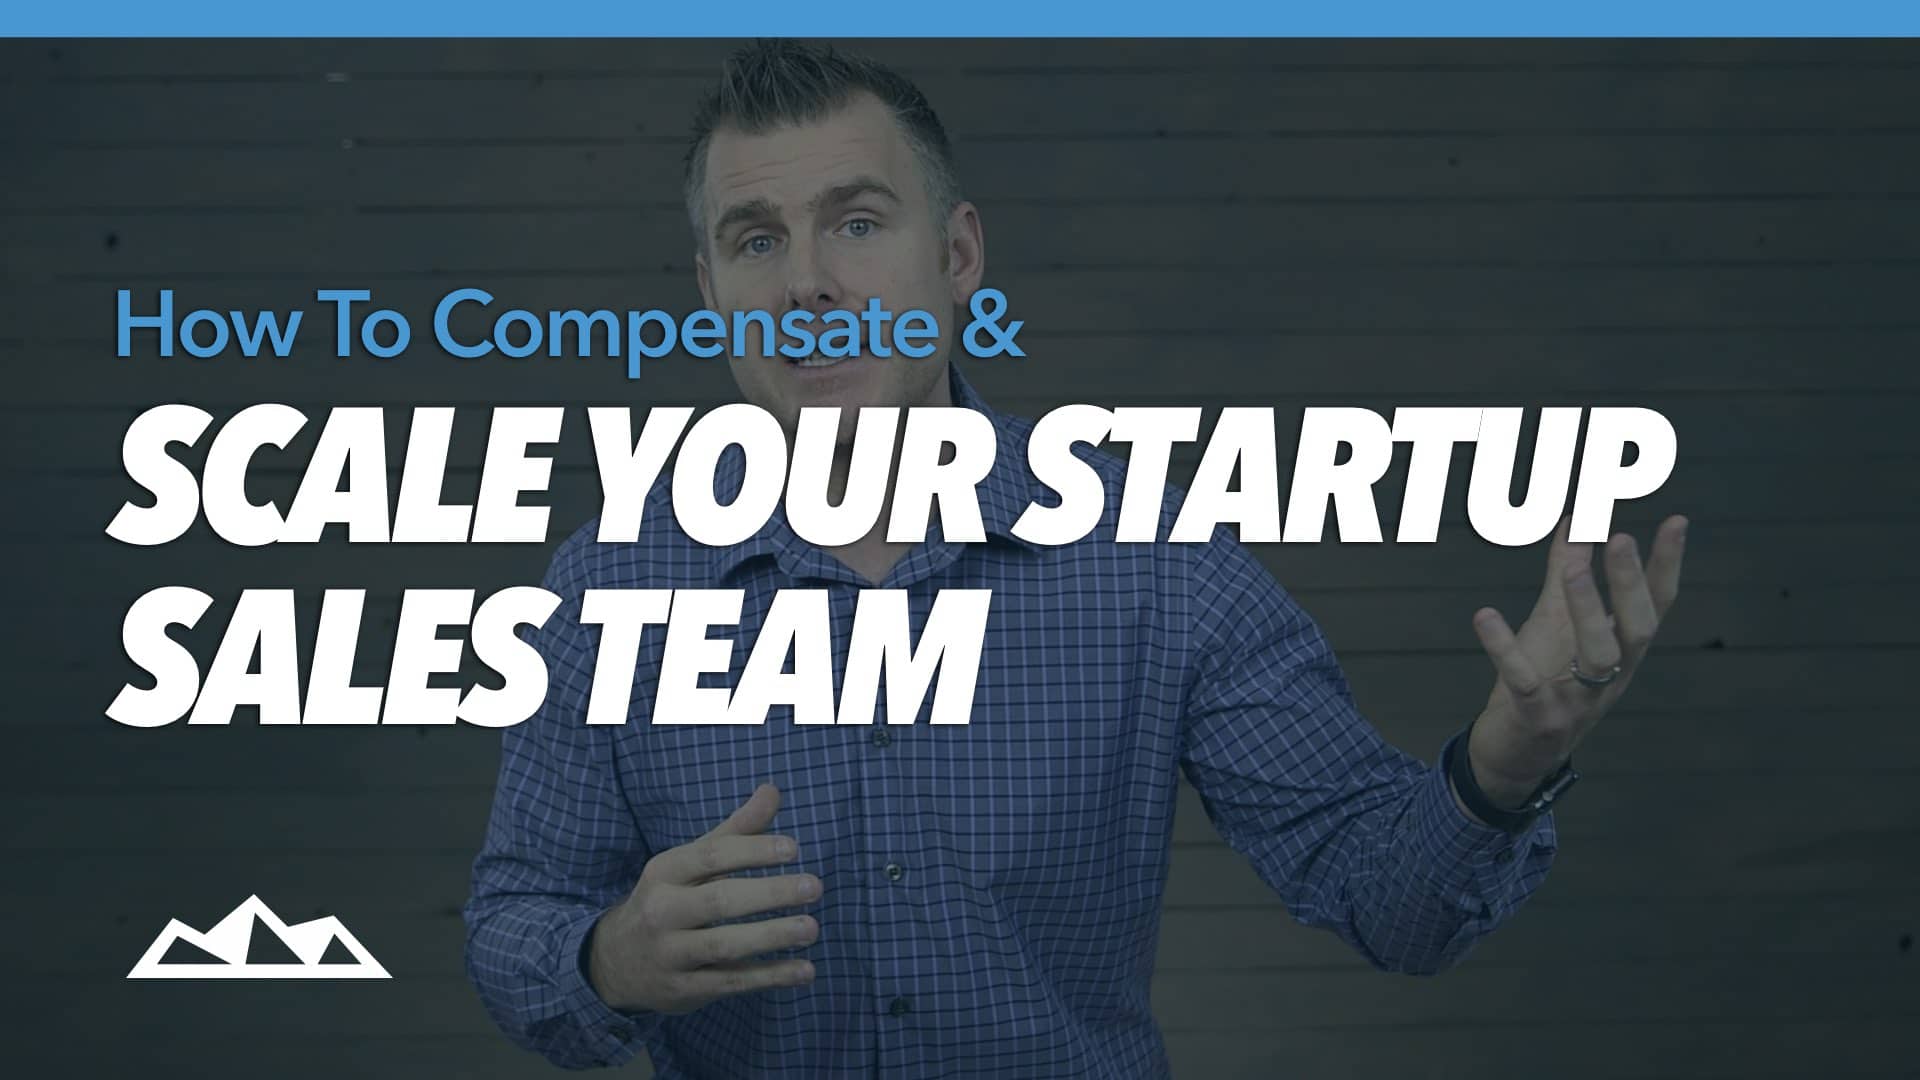 How To Compensate & Scale Your Startup Sales Team